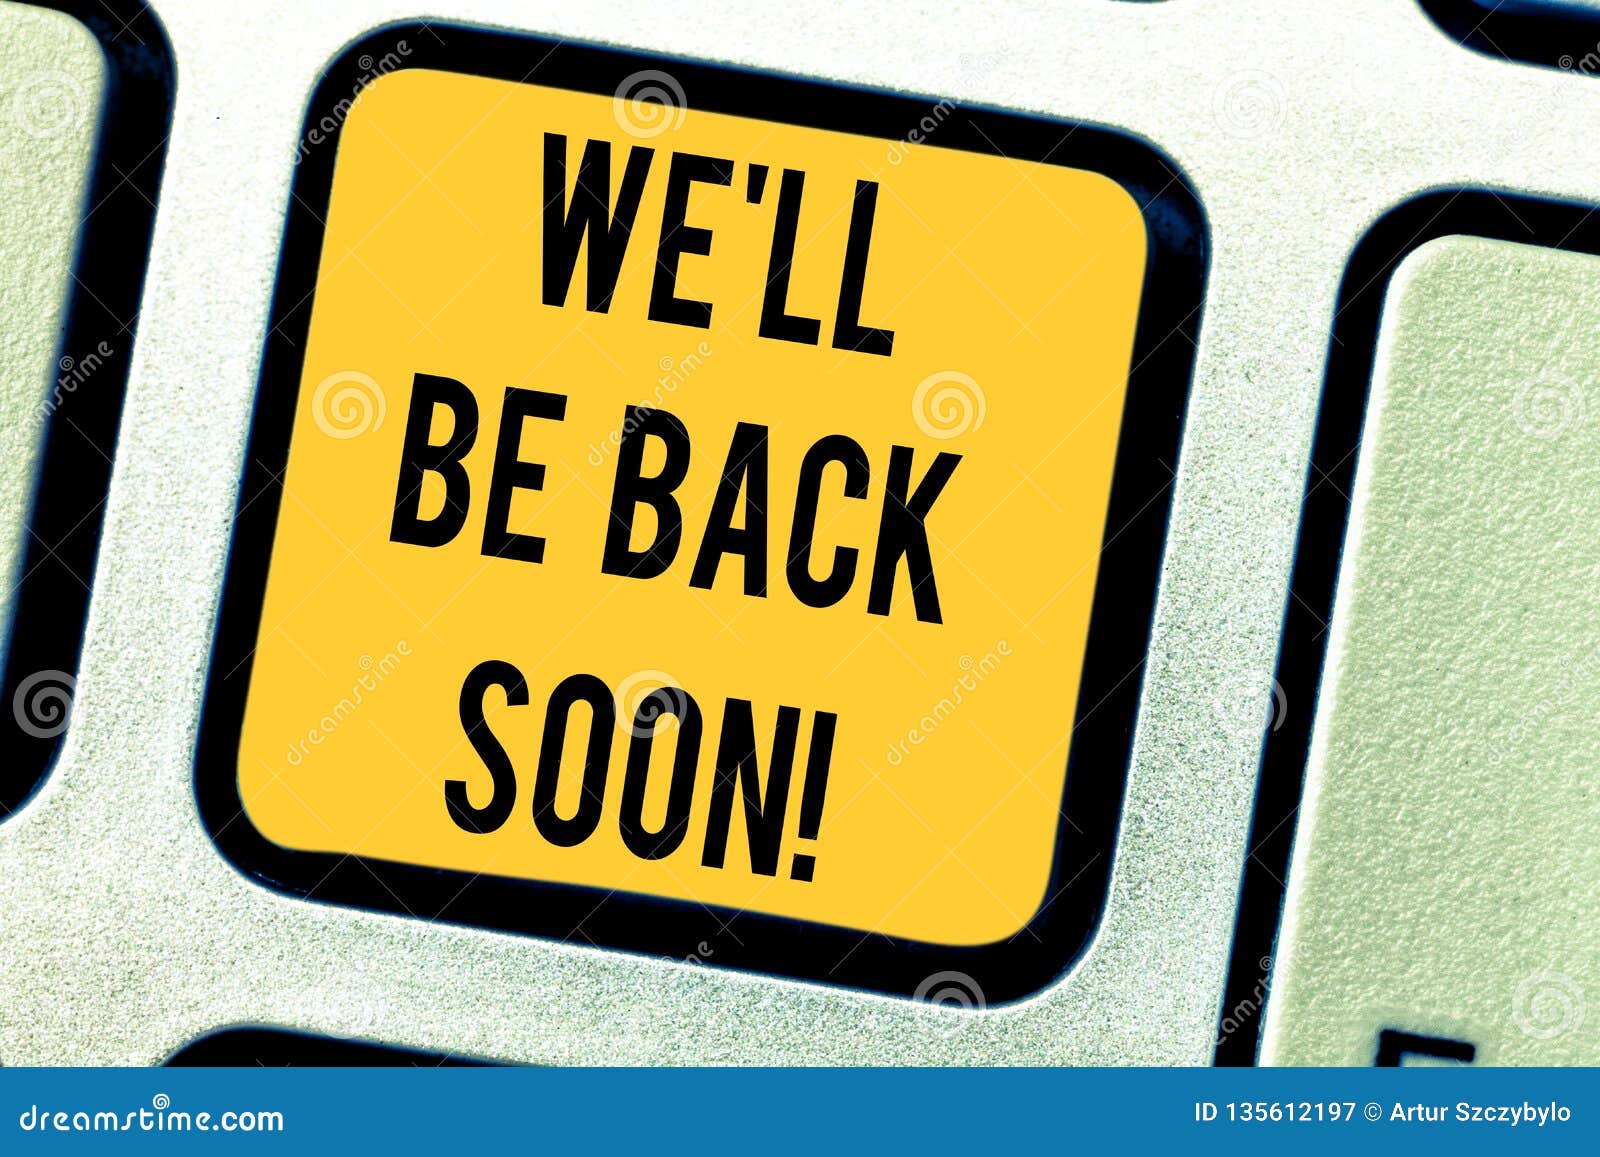 Come back to work. Come back картинки. Back soon. We ll back soon. I'll be back soon картинки.